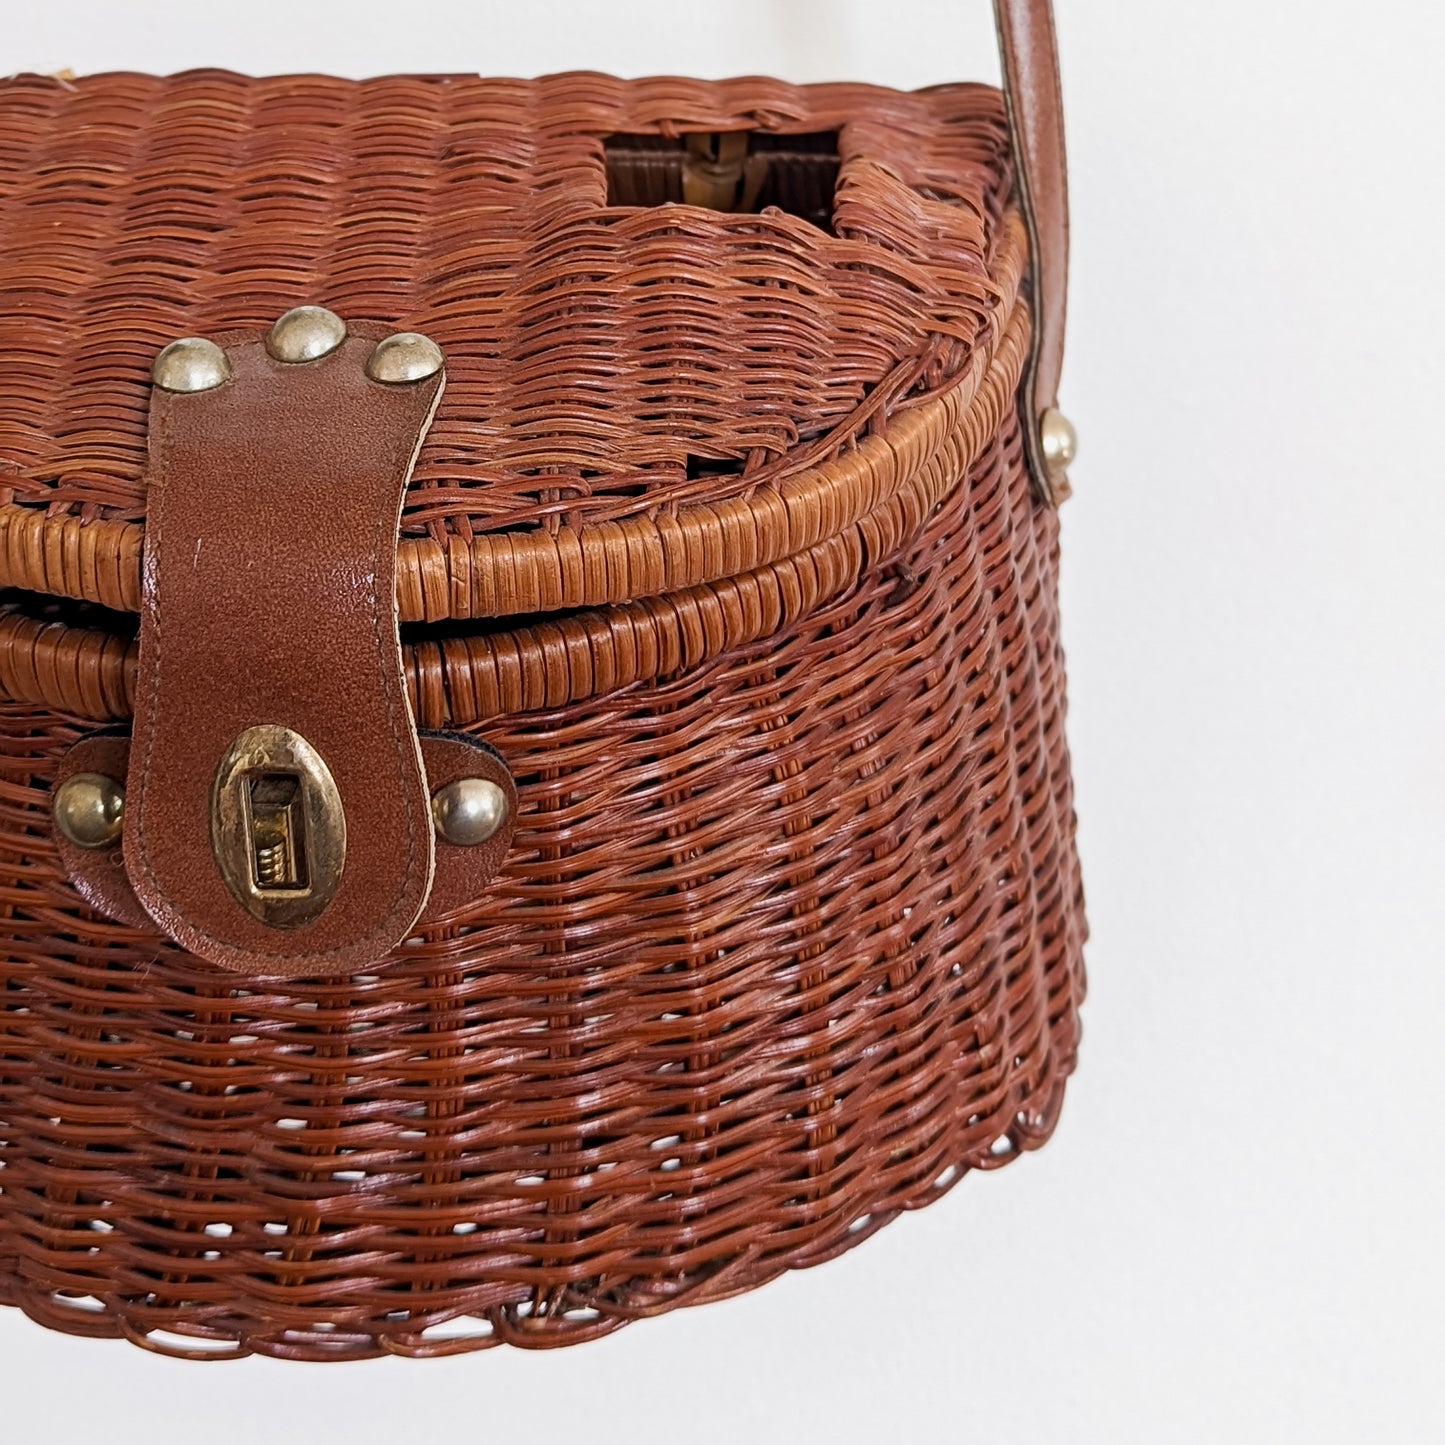 Accessories — Large Fishing Creel Basket — Woodland Things